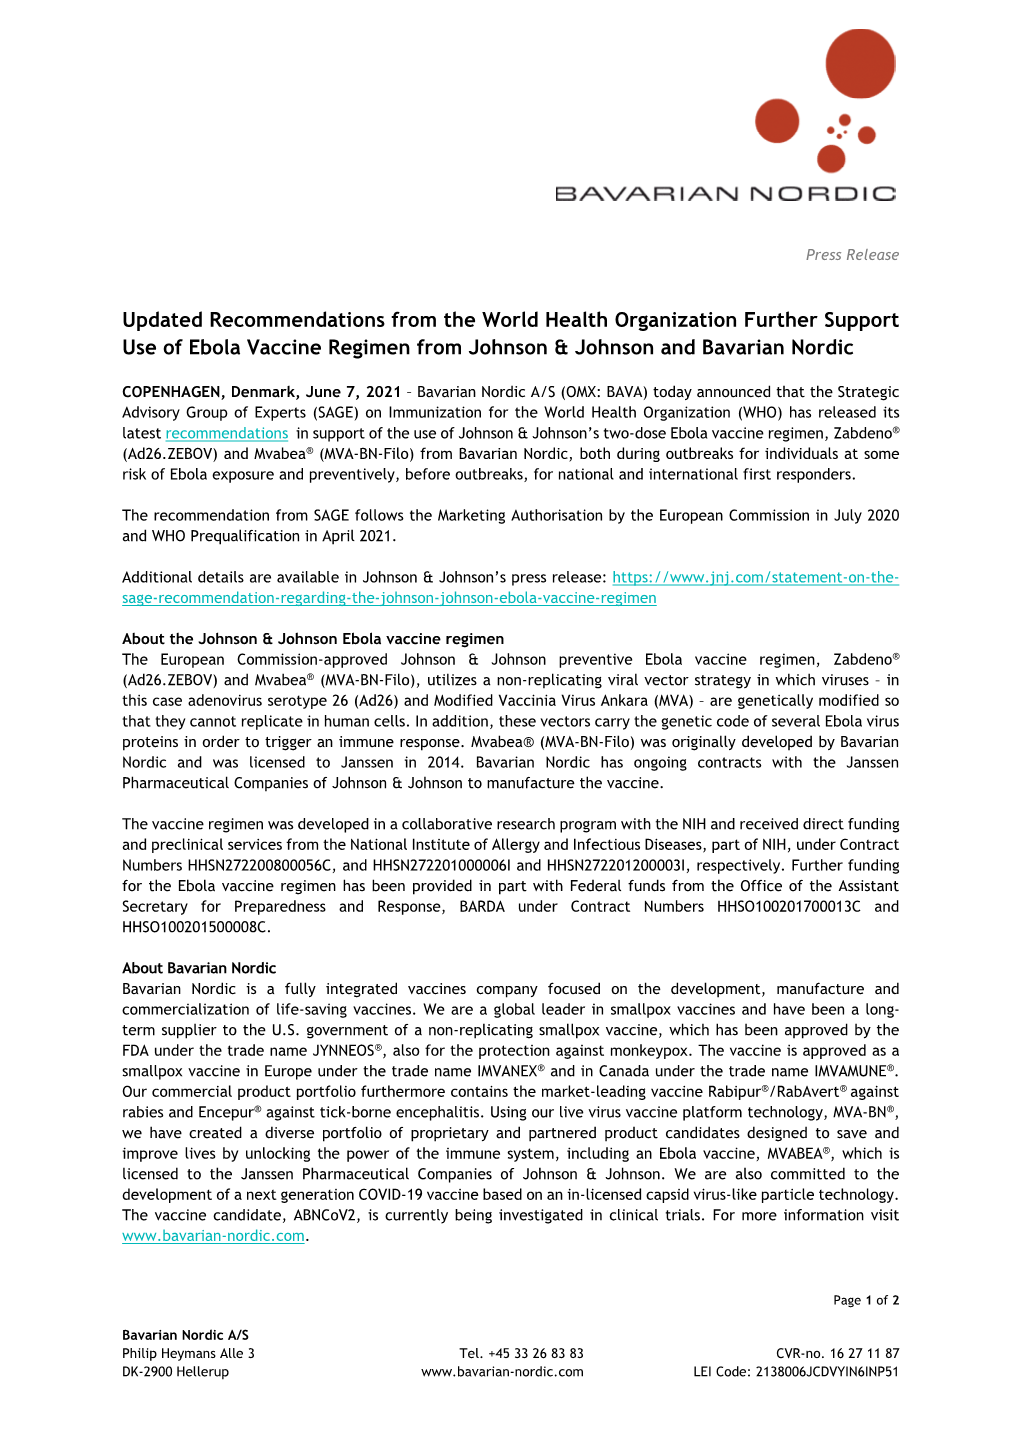 Updated Recommendations from the World Health Organization Further Support Use of Ebola Vaccine Regimen from Johnson & Johnson and Bavarian Nordic